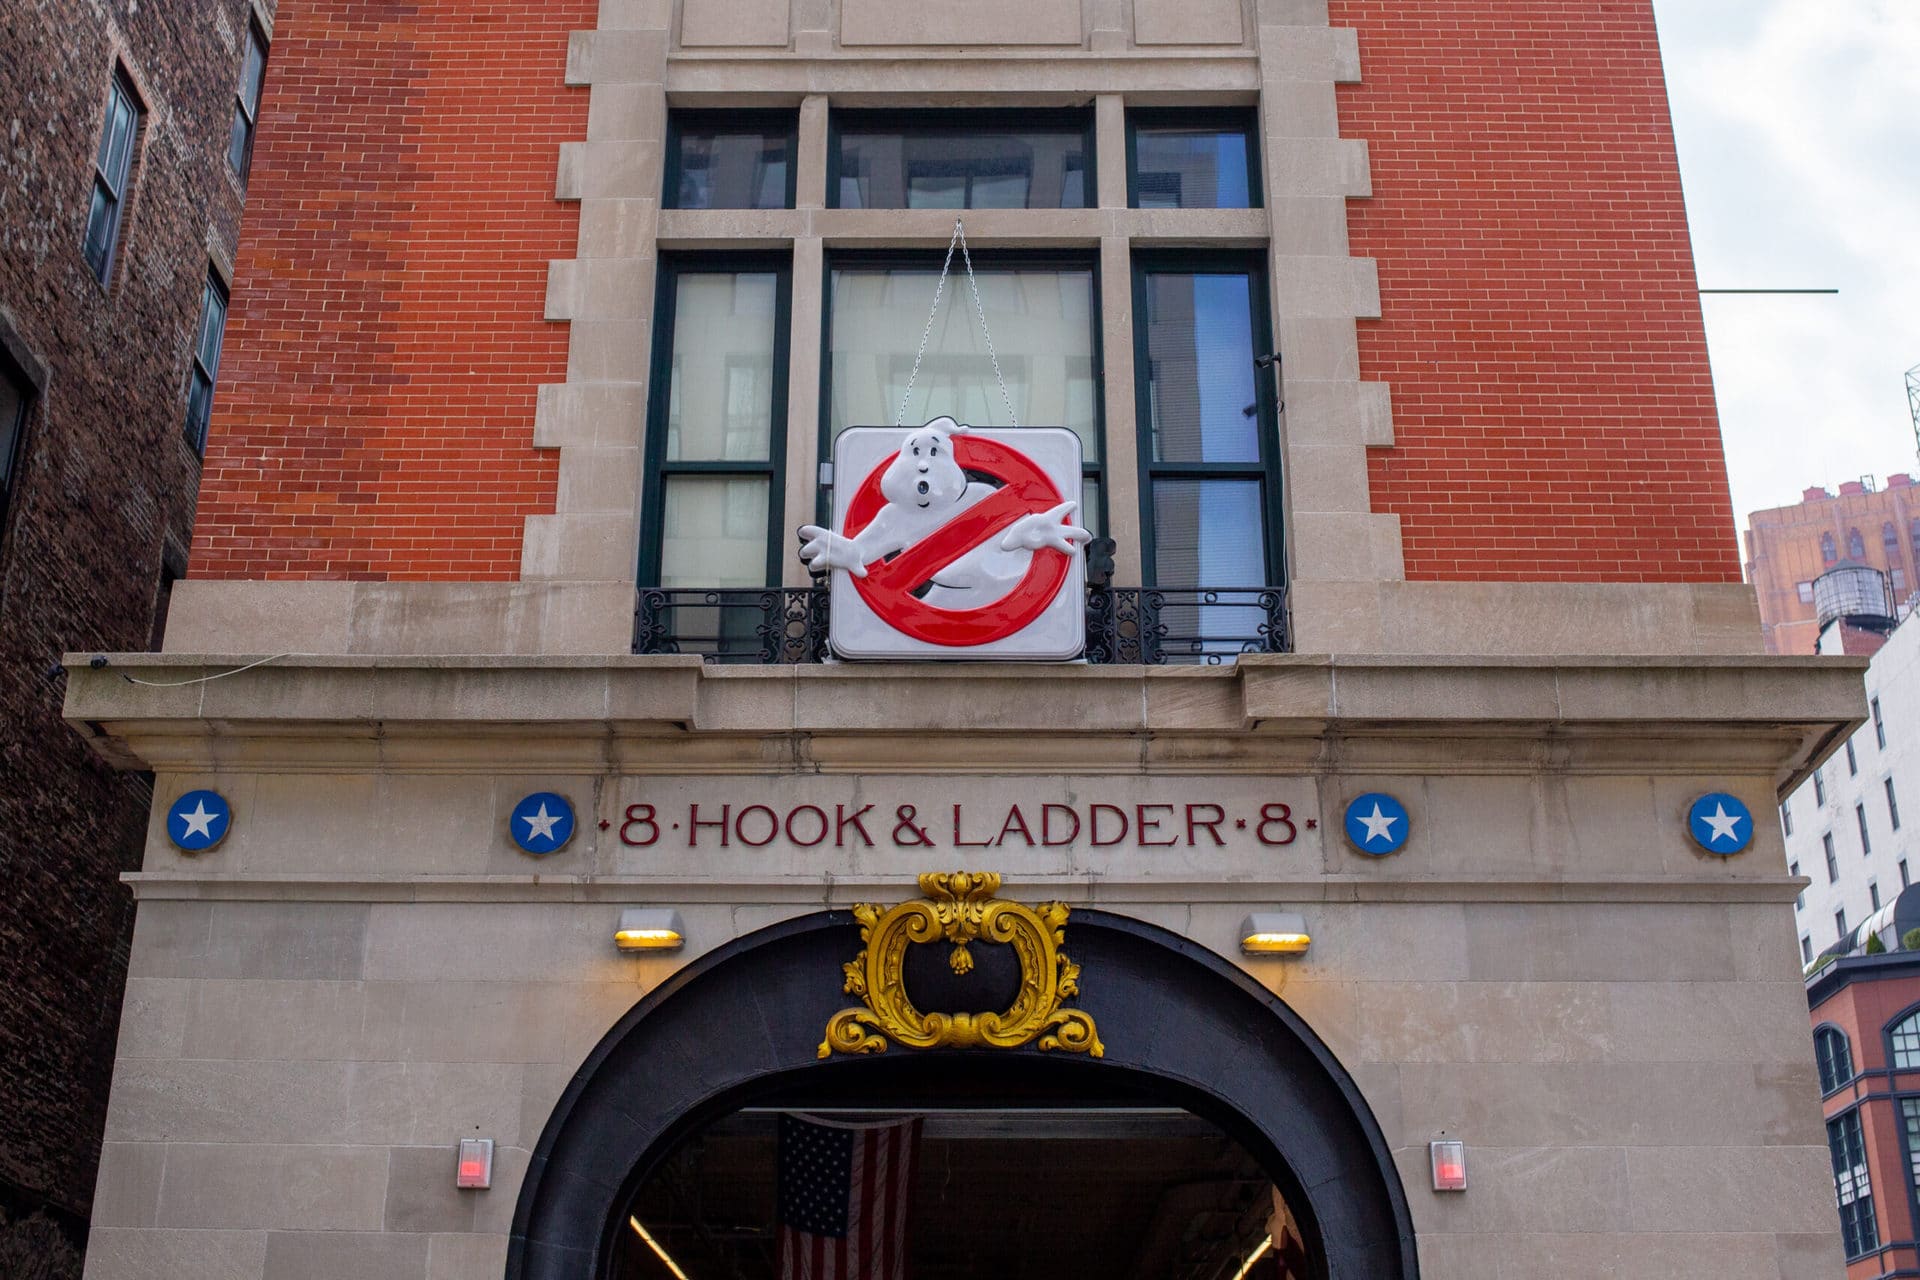 Home to Hook and Ladder Company 8, the original 'Ghostbusters